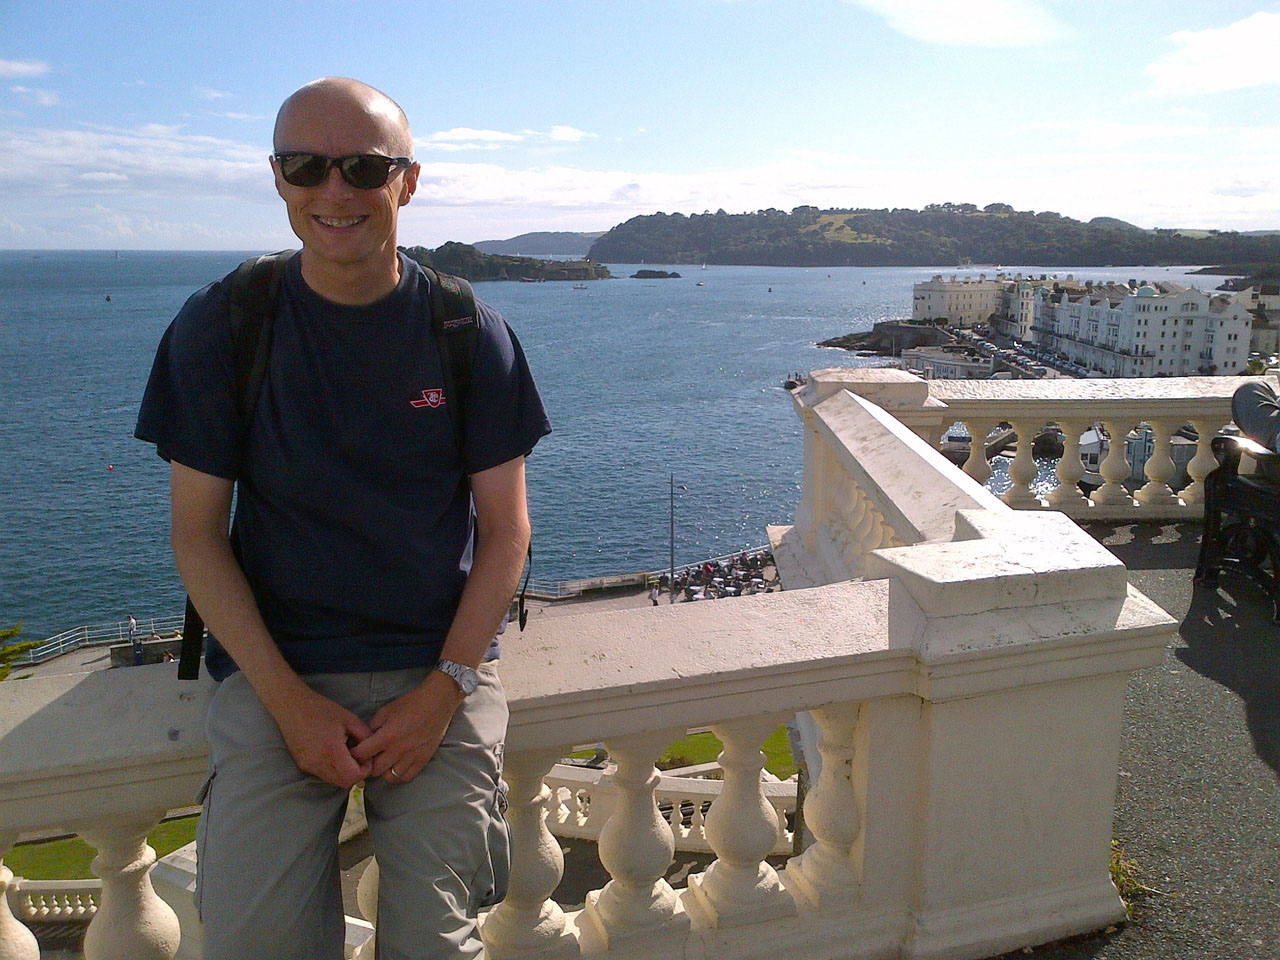 On Plymouth Hoe overlooking the Sound. Photo couresty Andy Byford, CEO